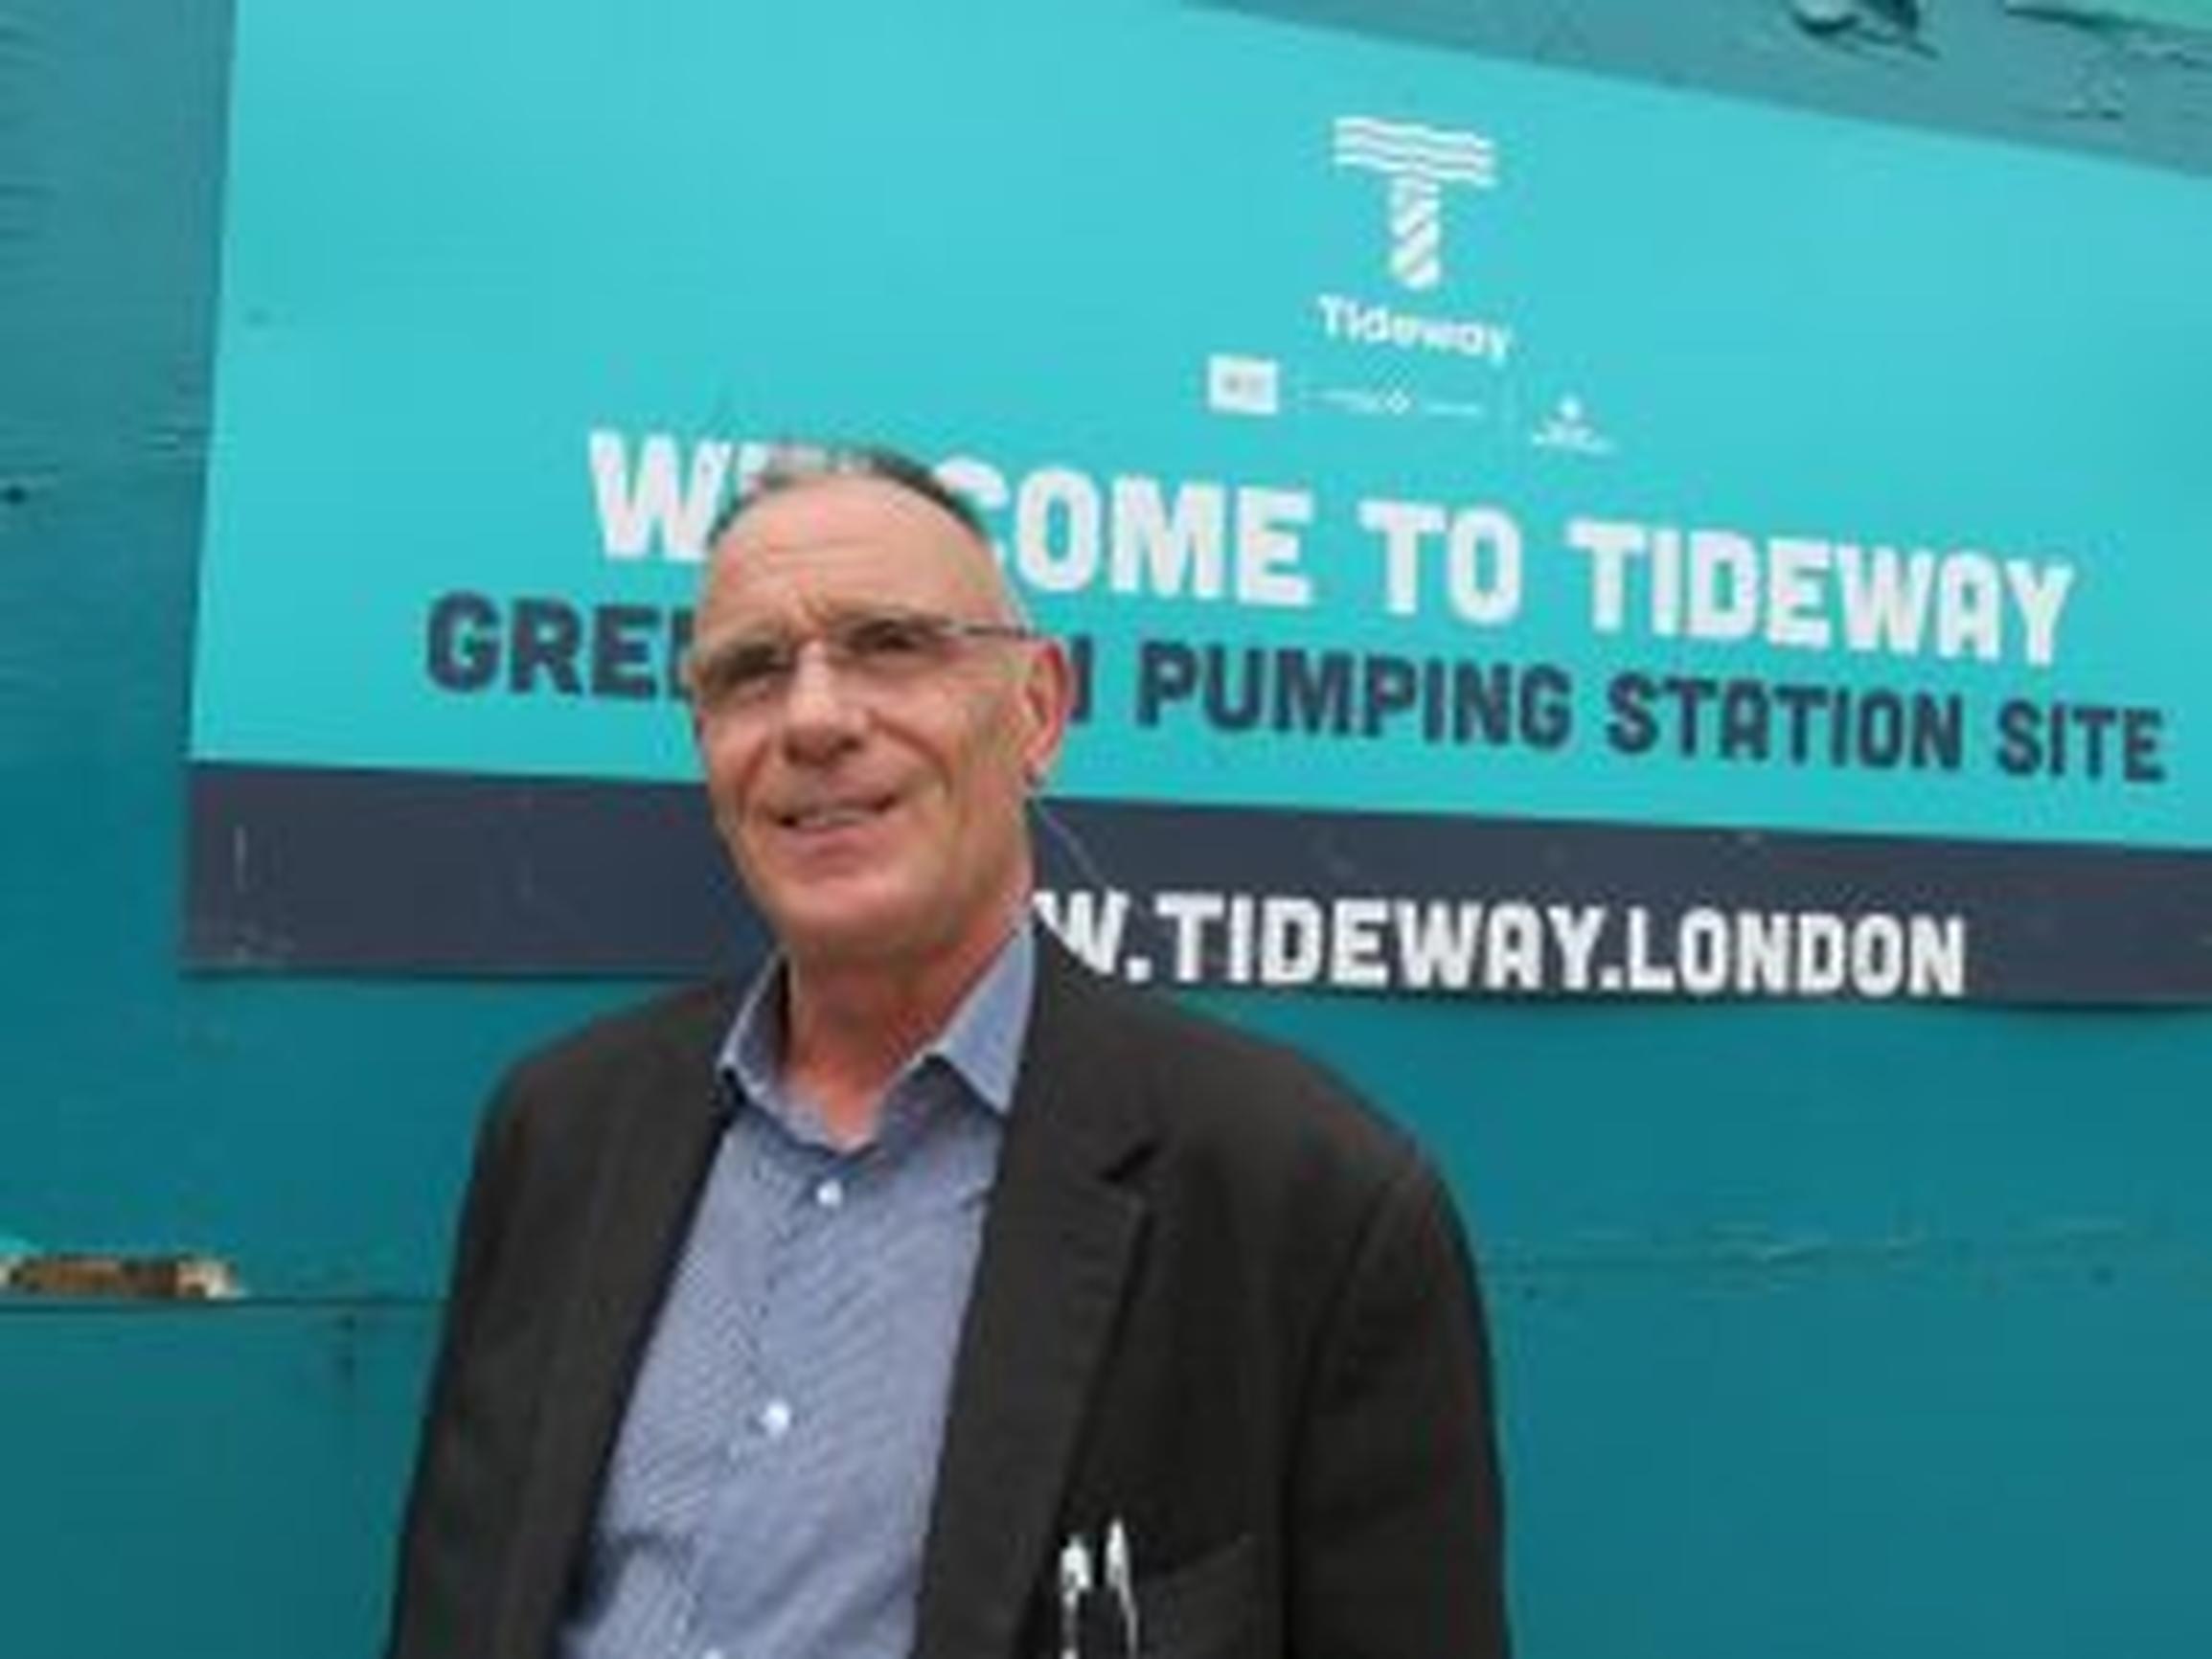 Gordon Sutherland, Traffic and Road Logistics Manager for Tideway, explains why FORS has been crucial to help mitigate the risk to safety and efficiency across the Tideway road transport supply chain